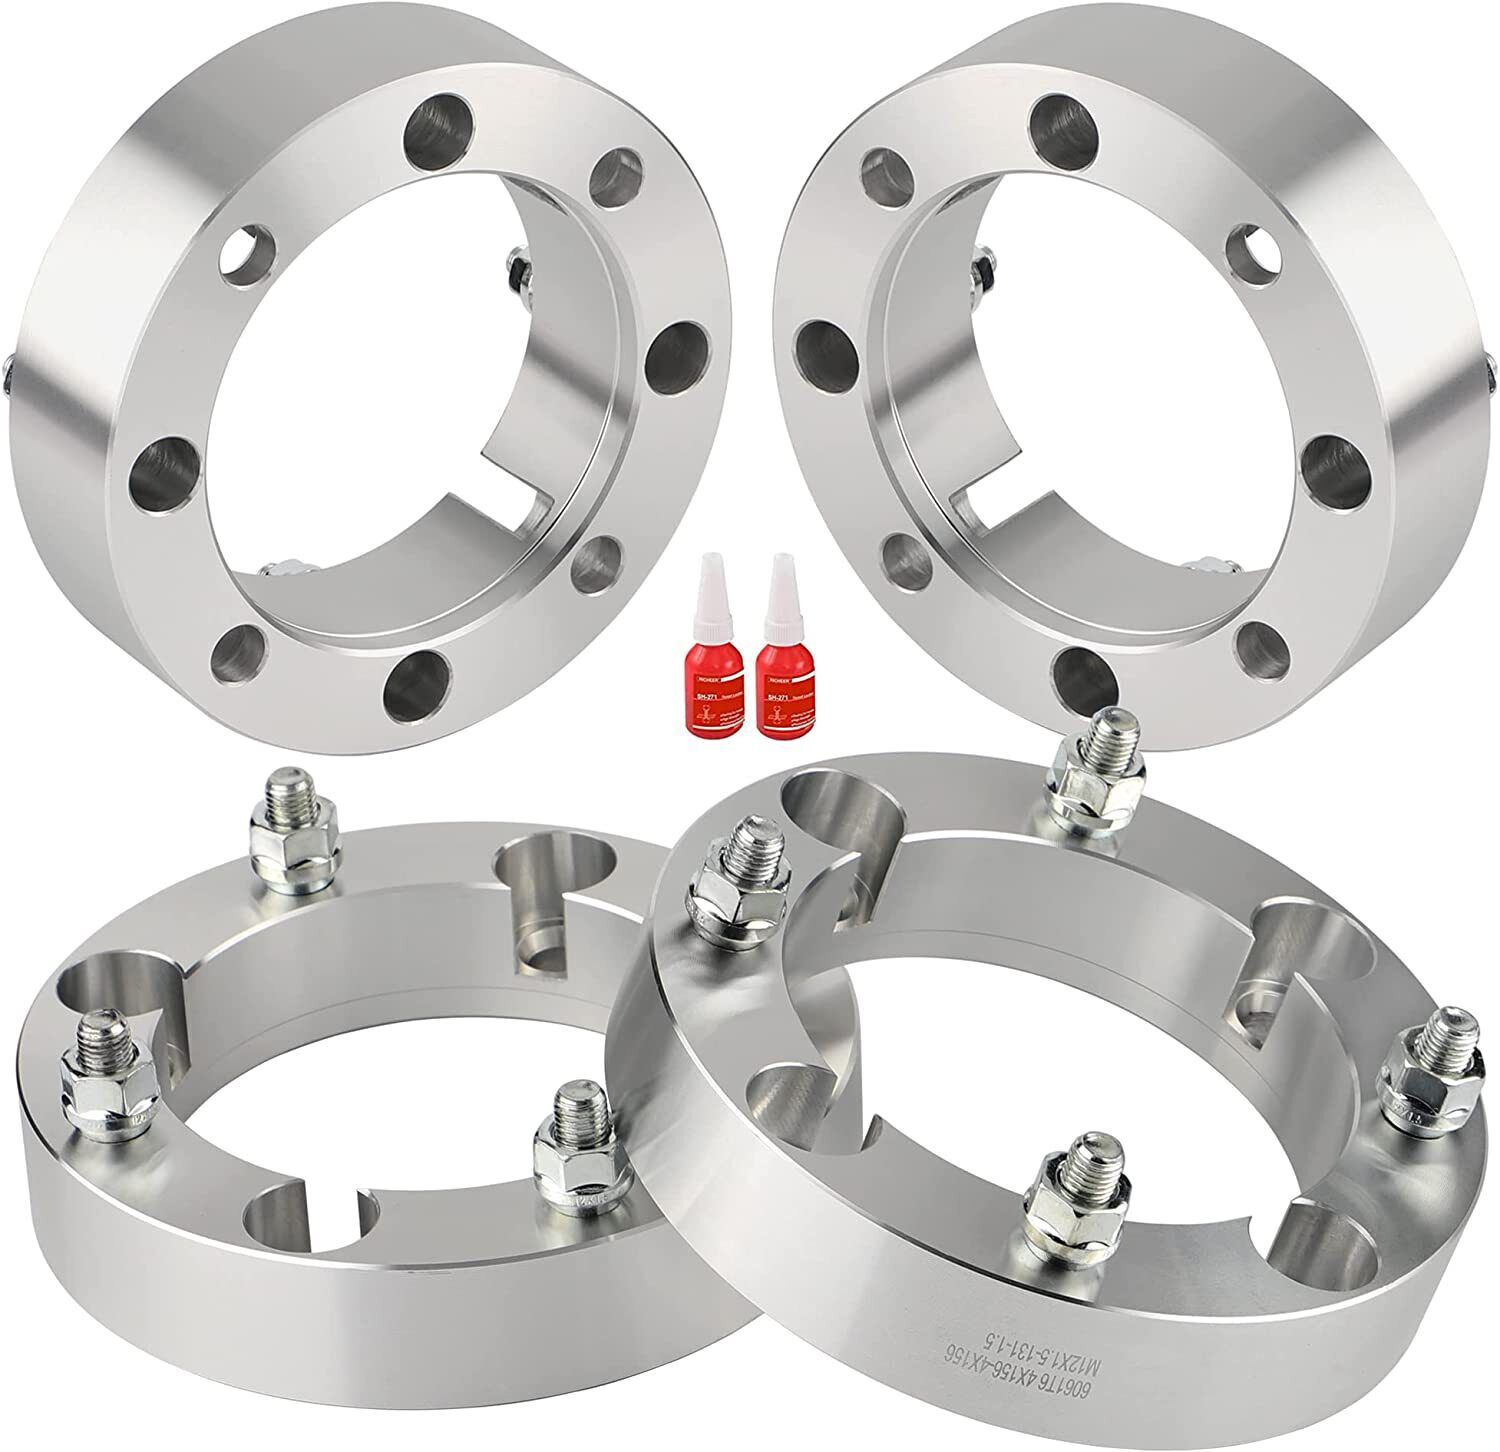 4x156mm ATV Wheel Spacers 1.5 inch with 12x1.5 Studs for Polaris RZR Ranger